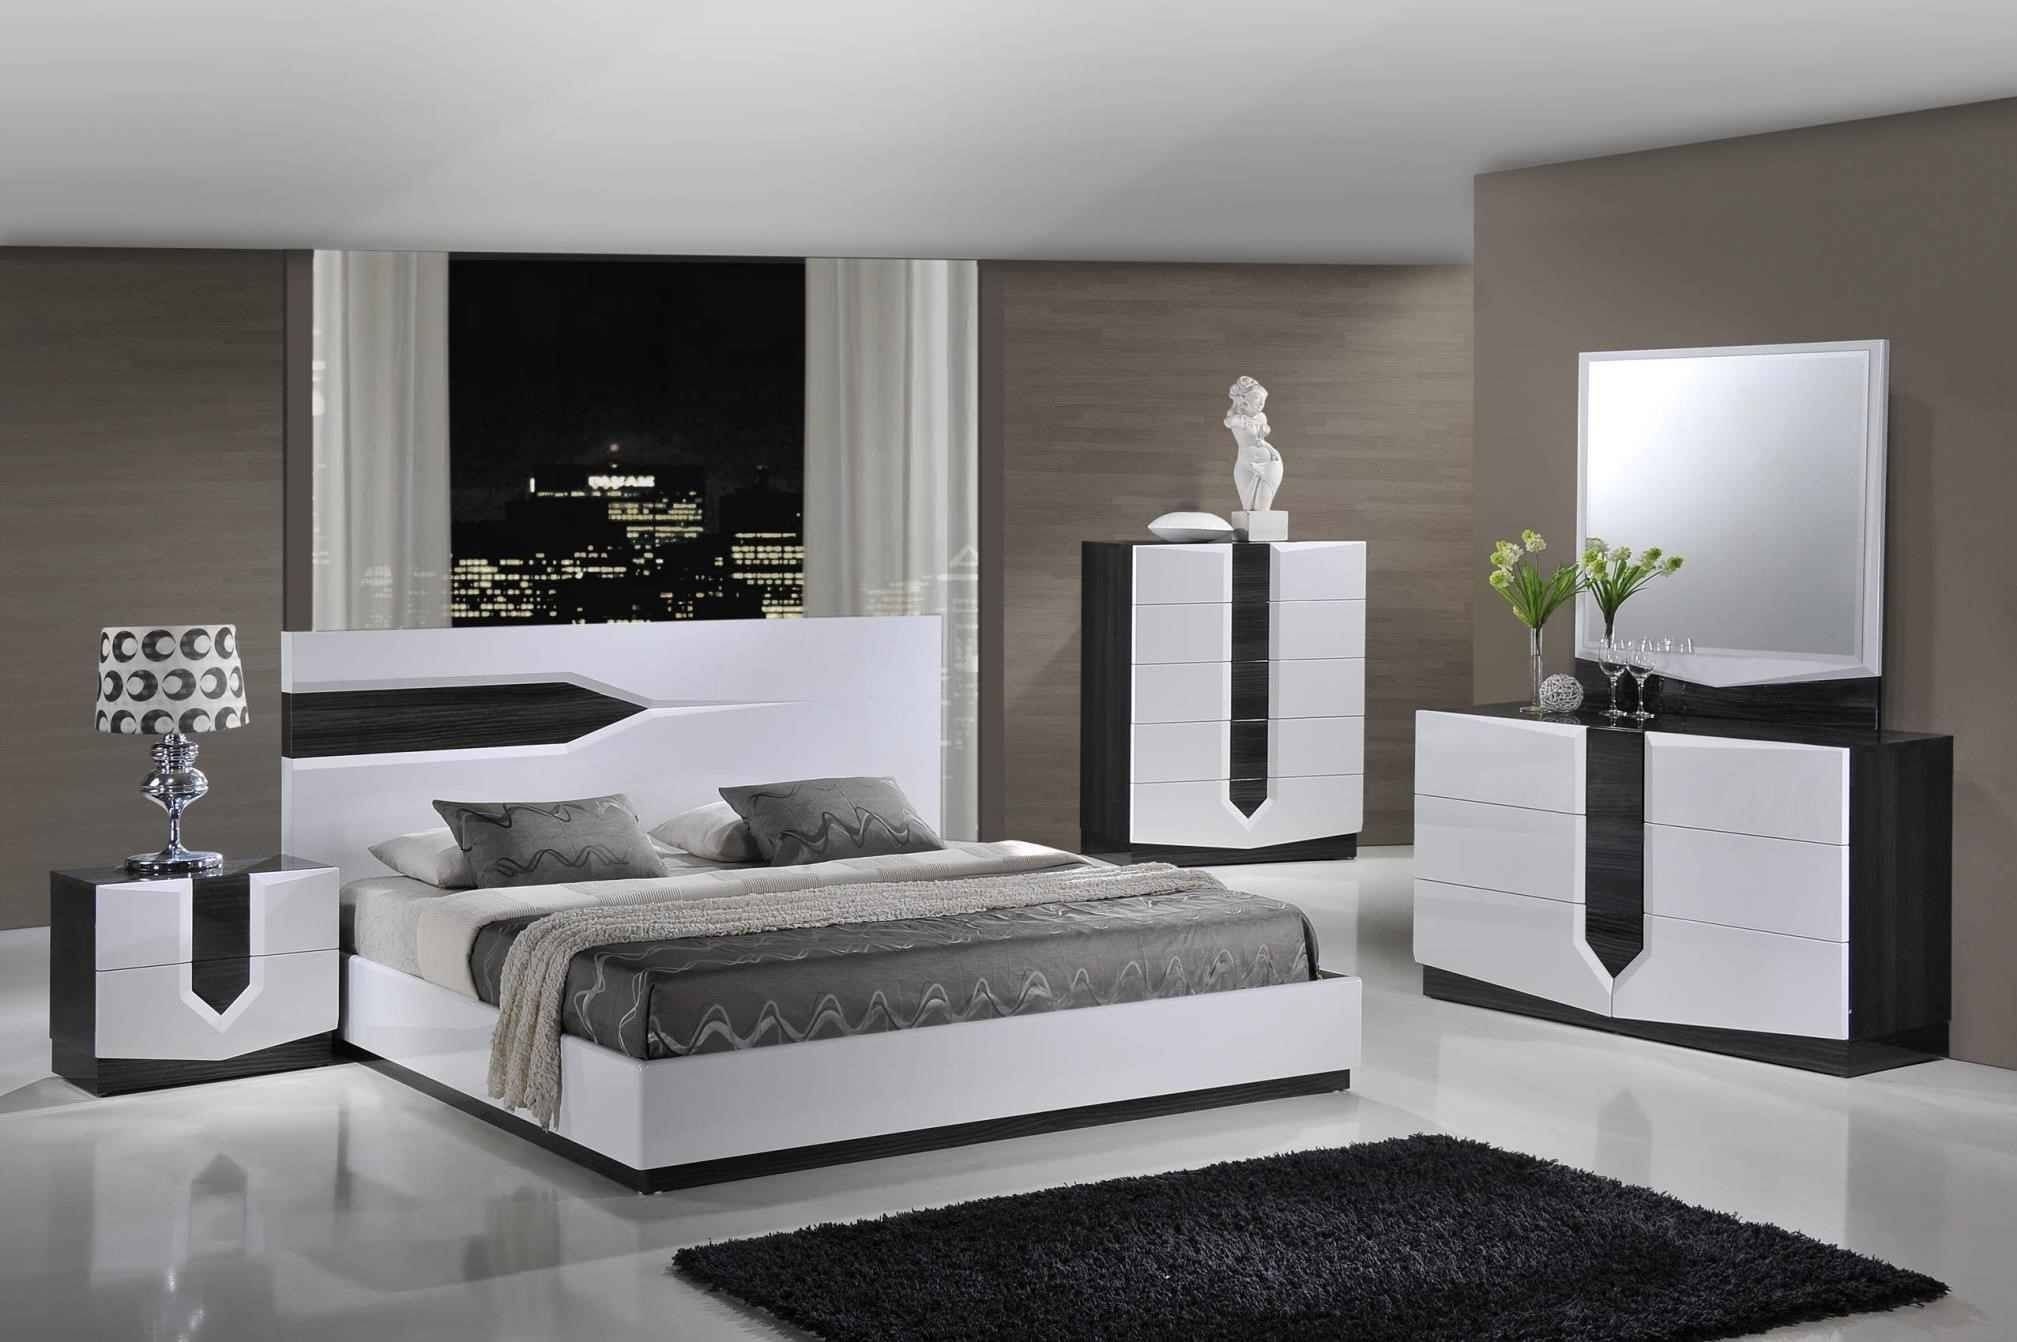 Bedroom Furniture Black Gloss (View 12 of 15)